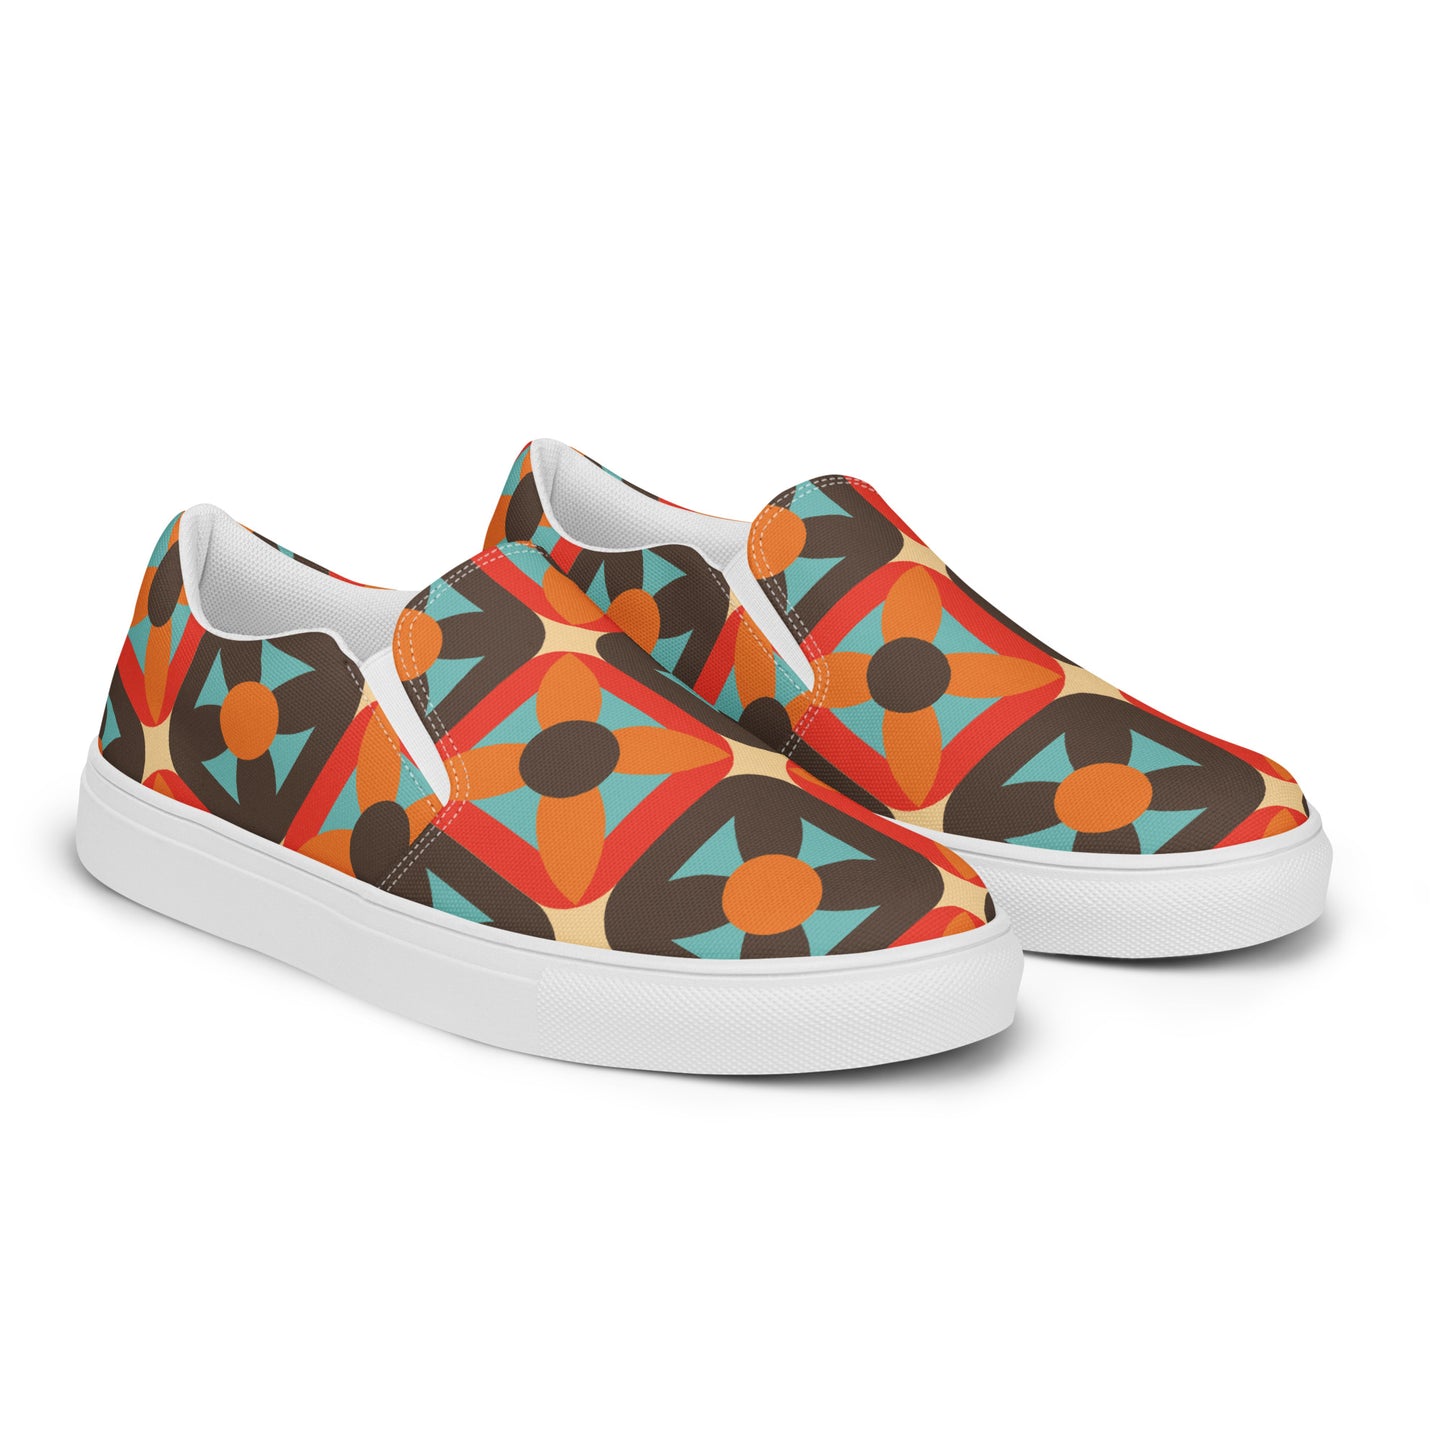 Retro Block - Sustainably Made Women’s slip-on canvas shoes